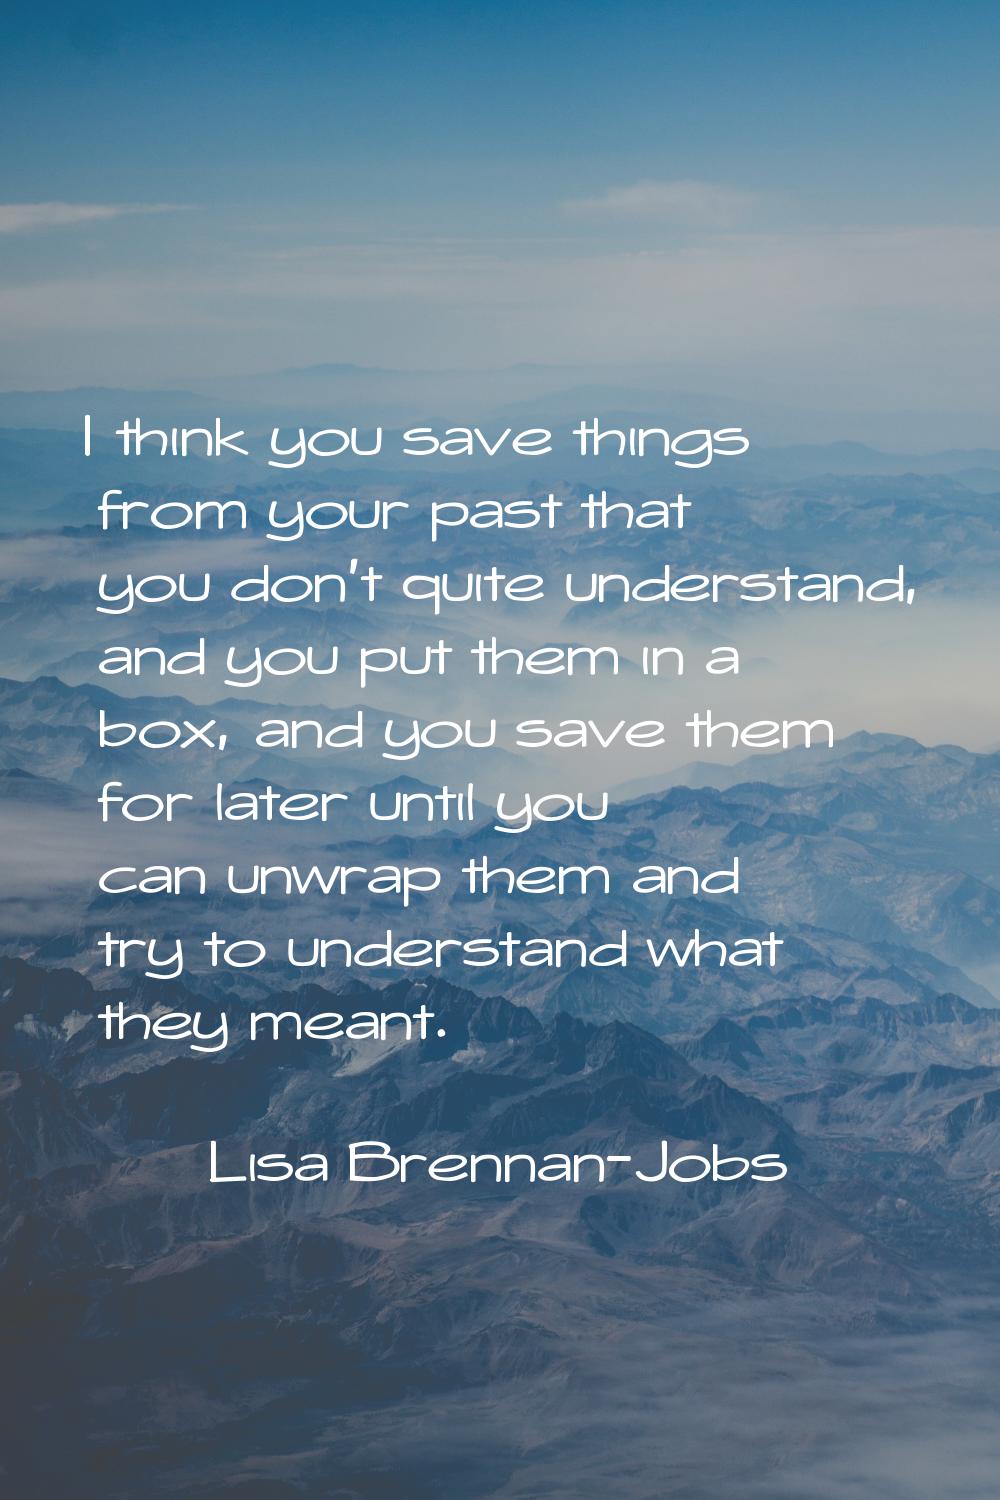 I think you save things from your past that you don't quite understand, and you put them in a box, 